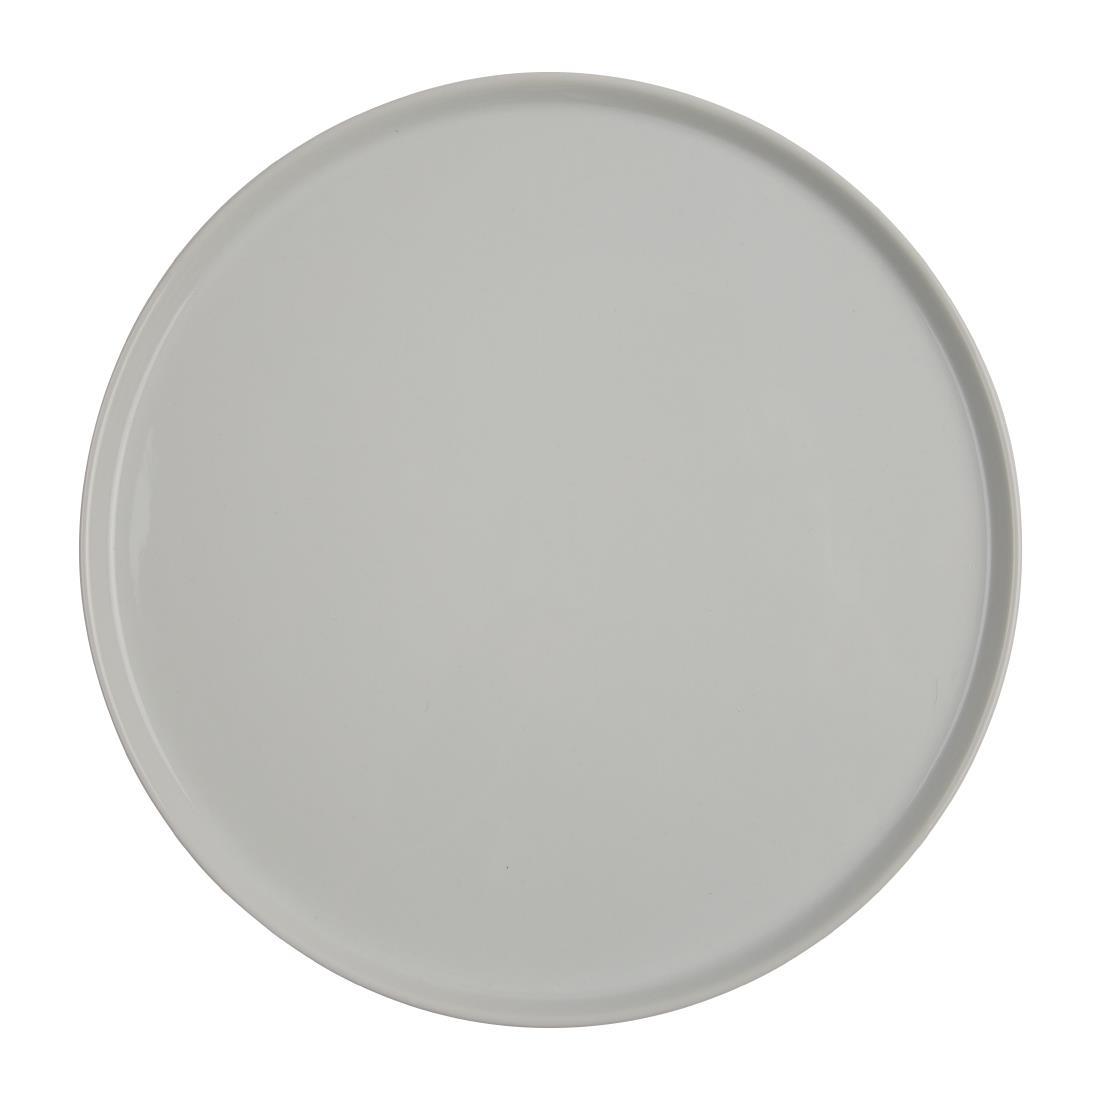 Olympia Whiteware Pizza Plates 330mm (Pack of 4) - CD723  - 4